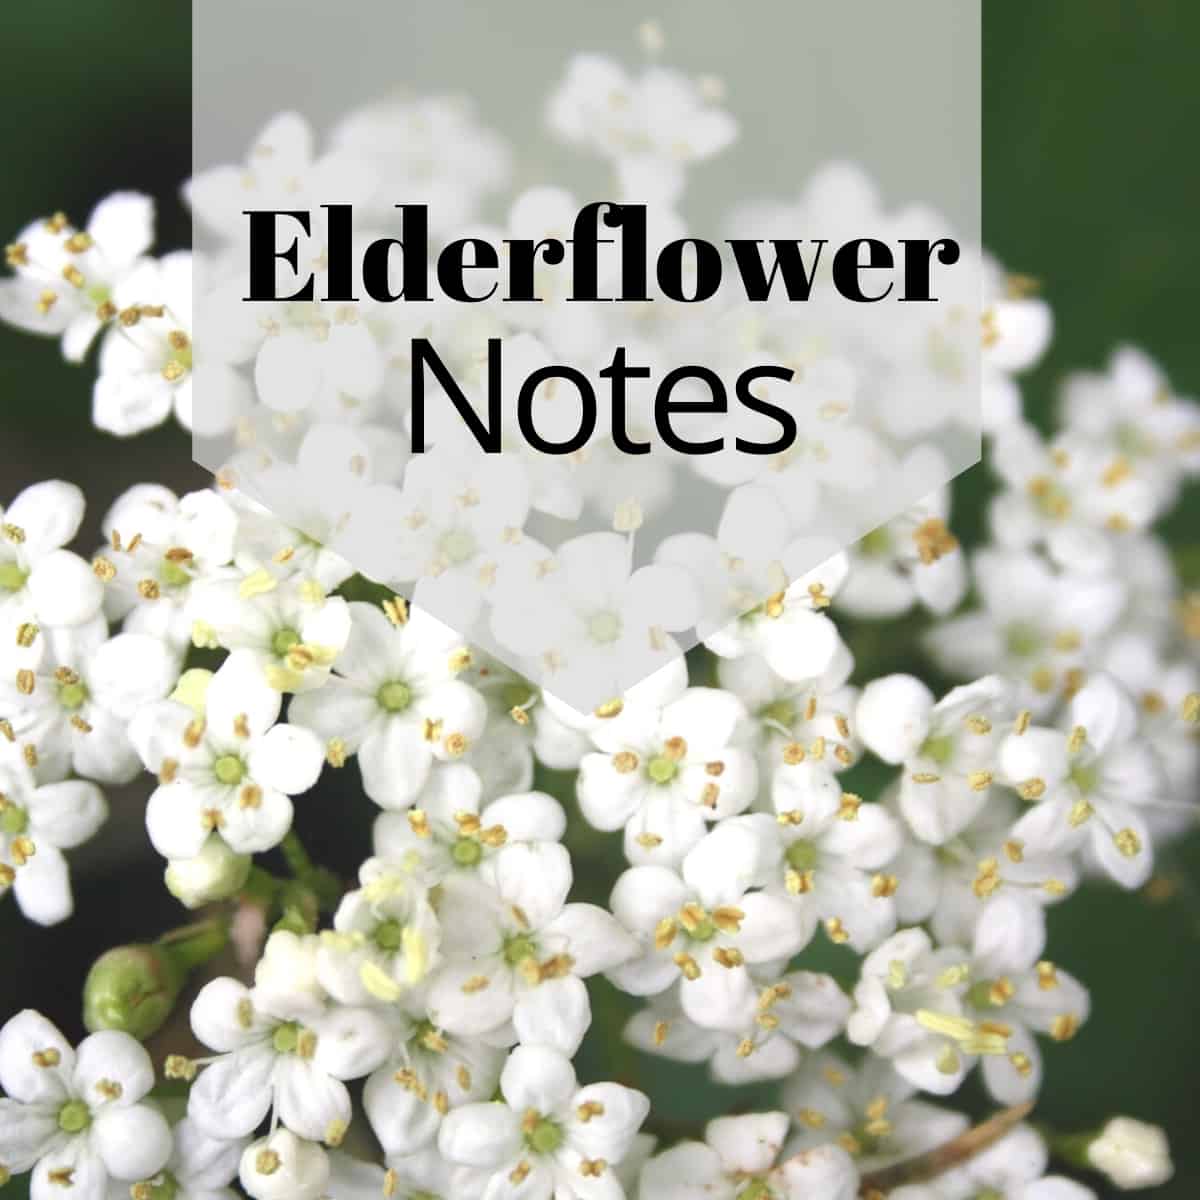 Blooms of elderflowers on a dark background with a banner and the words "Elderflower Notes".